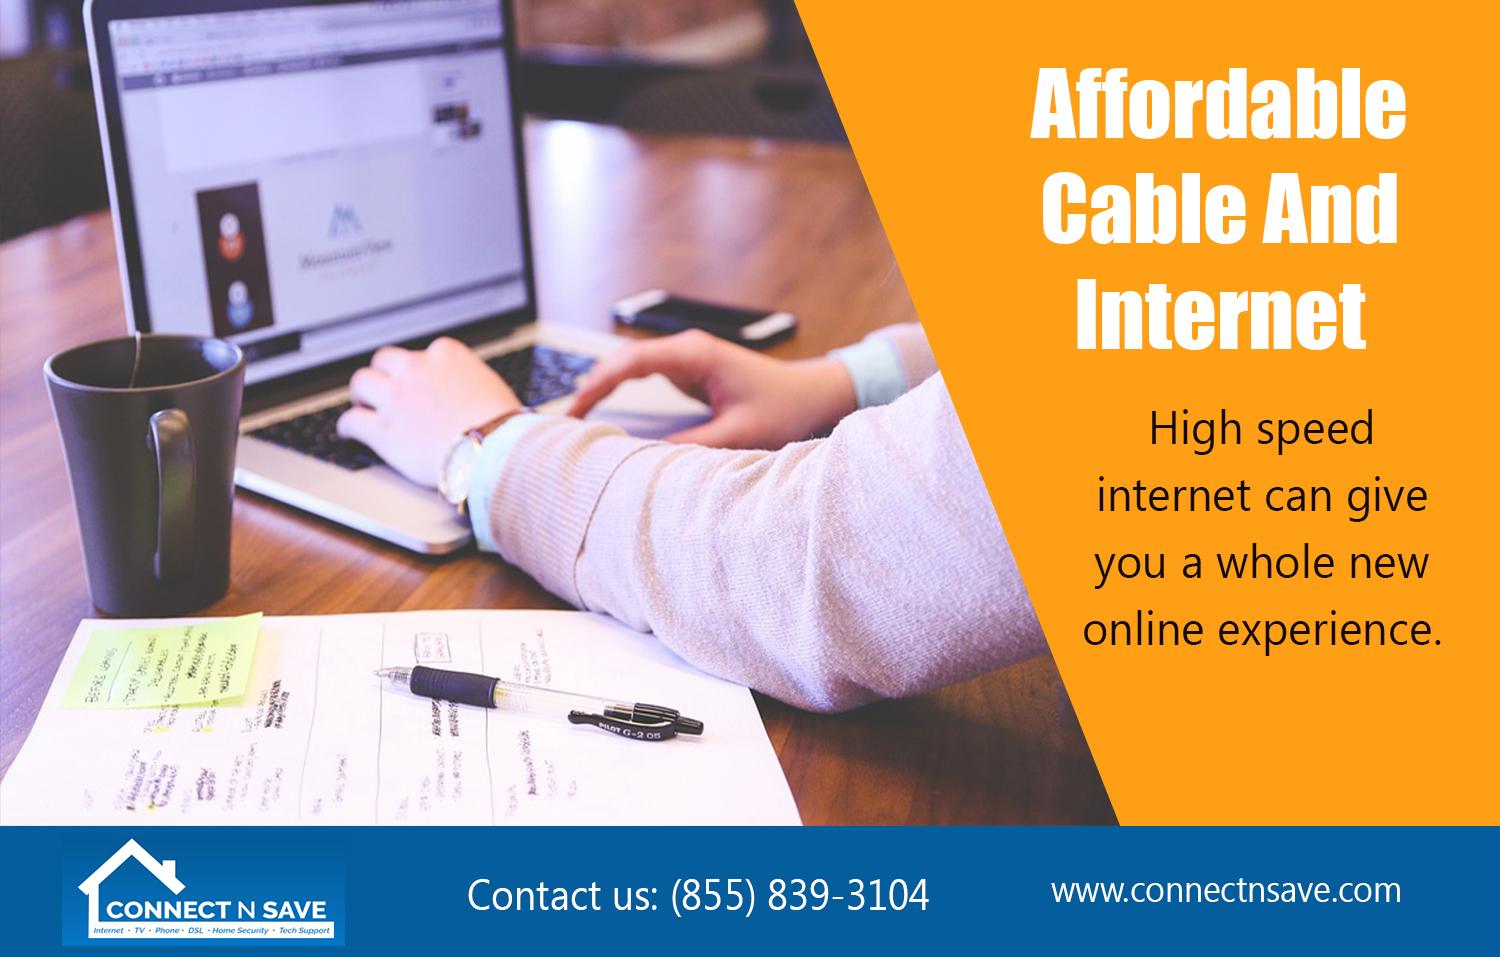 Affordable Cable And Internet | http://connectnsave.com/